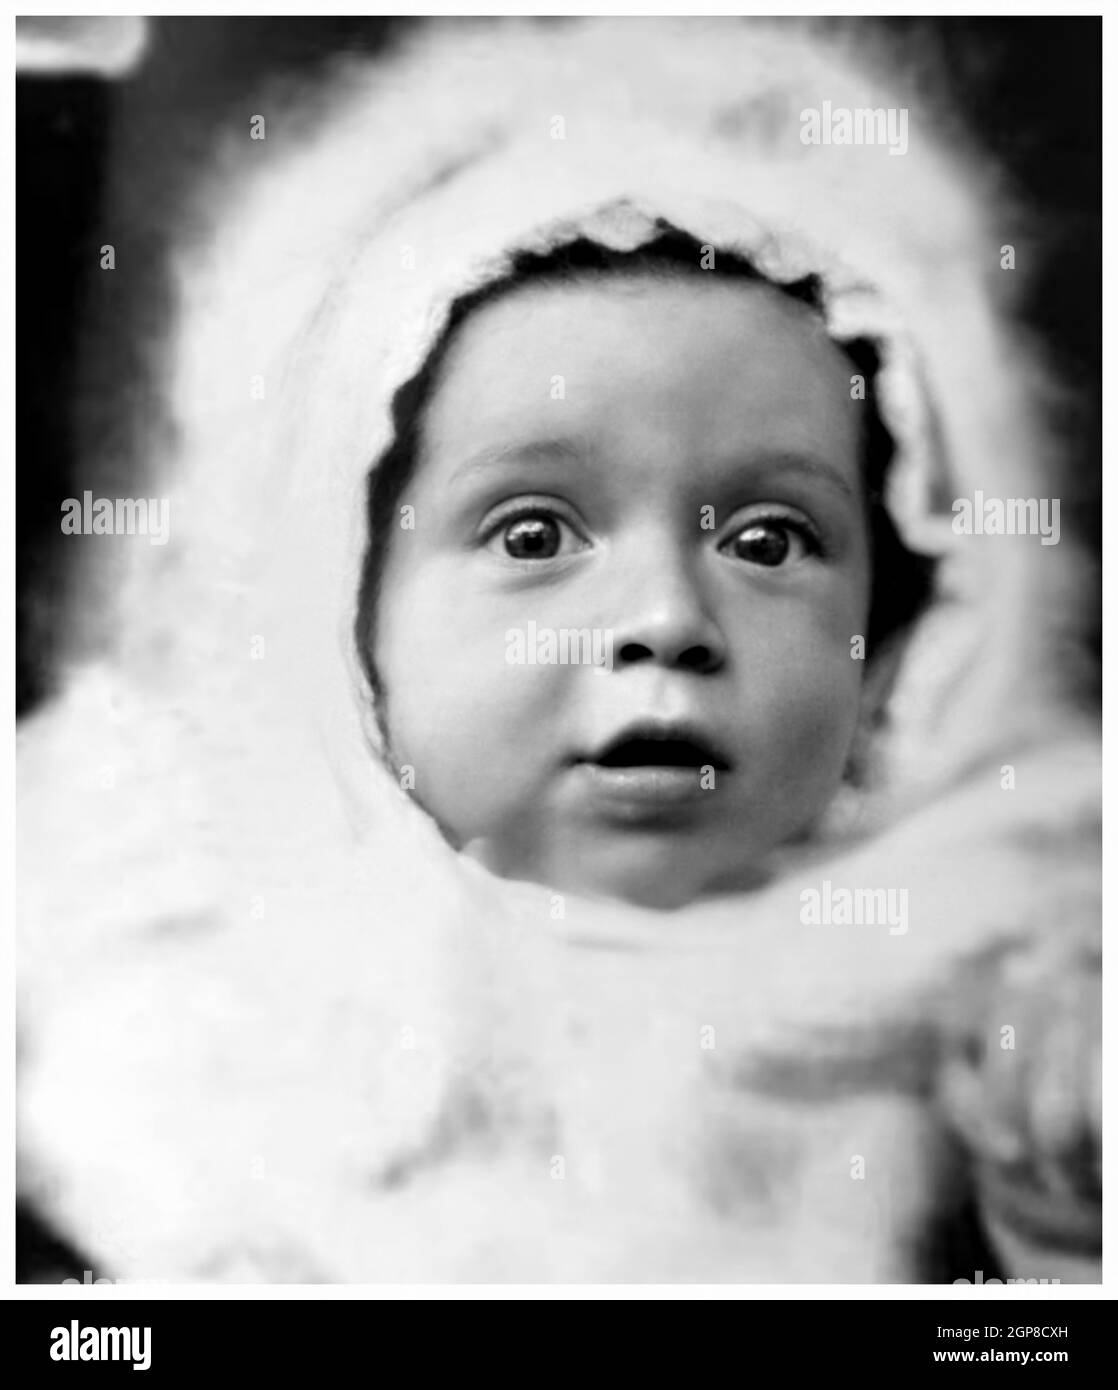 1940 , december , NEW YORK , USA : The celebrated american actor AL PACINO  ( born 25 april 1940 ) when was a young baby aged only 8 months . Unknown photographer .- HISTORY - FOTO STORICHE - ATTORE - MOVIE - CINEMA - personalità da bambino bambini da giovane - personality personalities when was young - INFANZIA - CHILDHOOD - BAMBINO - BAMBINI - CHILDREN - CHILD - ATTORE - PORTRAIT - RITRATTO - HISTORY - FOTO STORICHE --- ARCHIVIO GBB Stock Photo